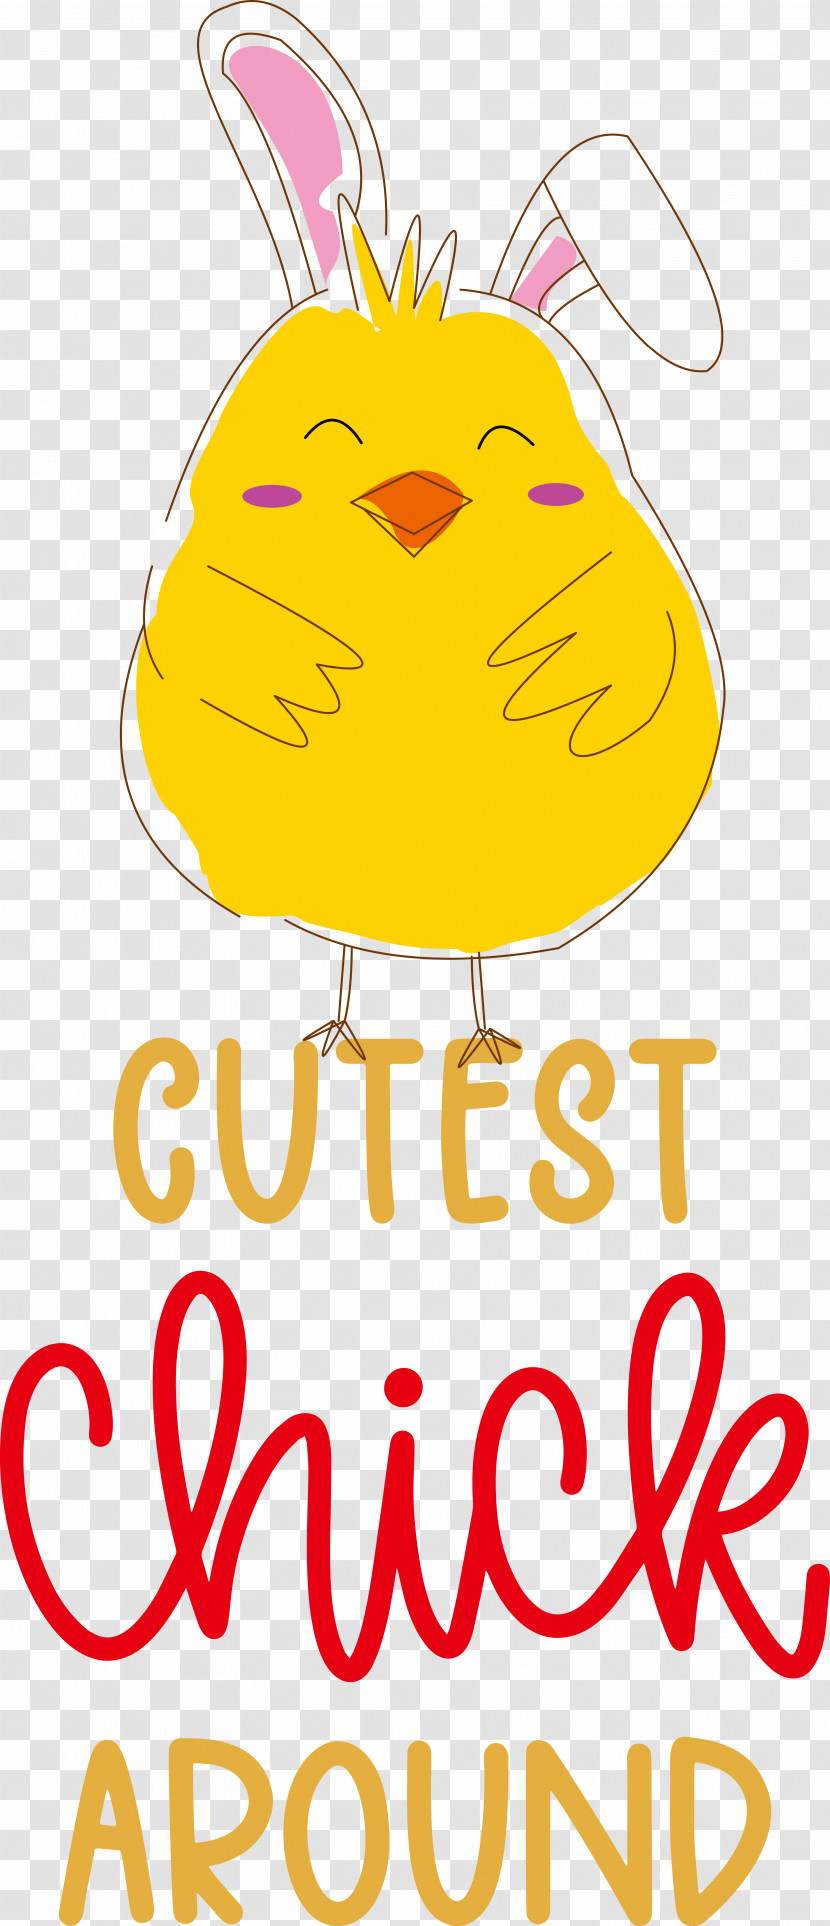 Line Smiley Yellow Happiness Lon:0jjw Transparent PNG